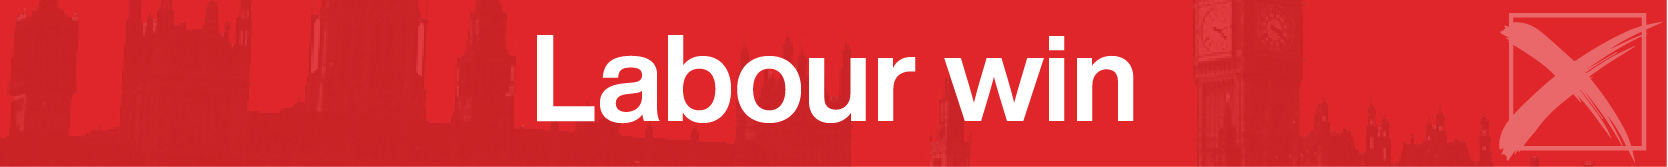 Banner graphic announcing a "Labour win" in white writing against a red background with a faded image of the Houses of Parliament.